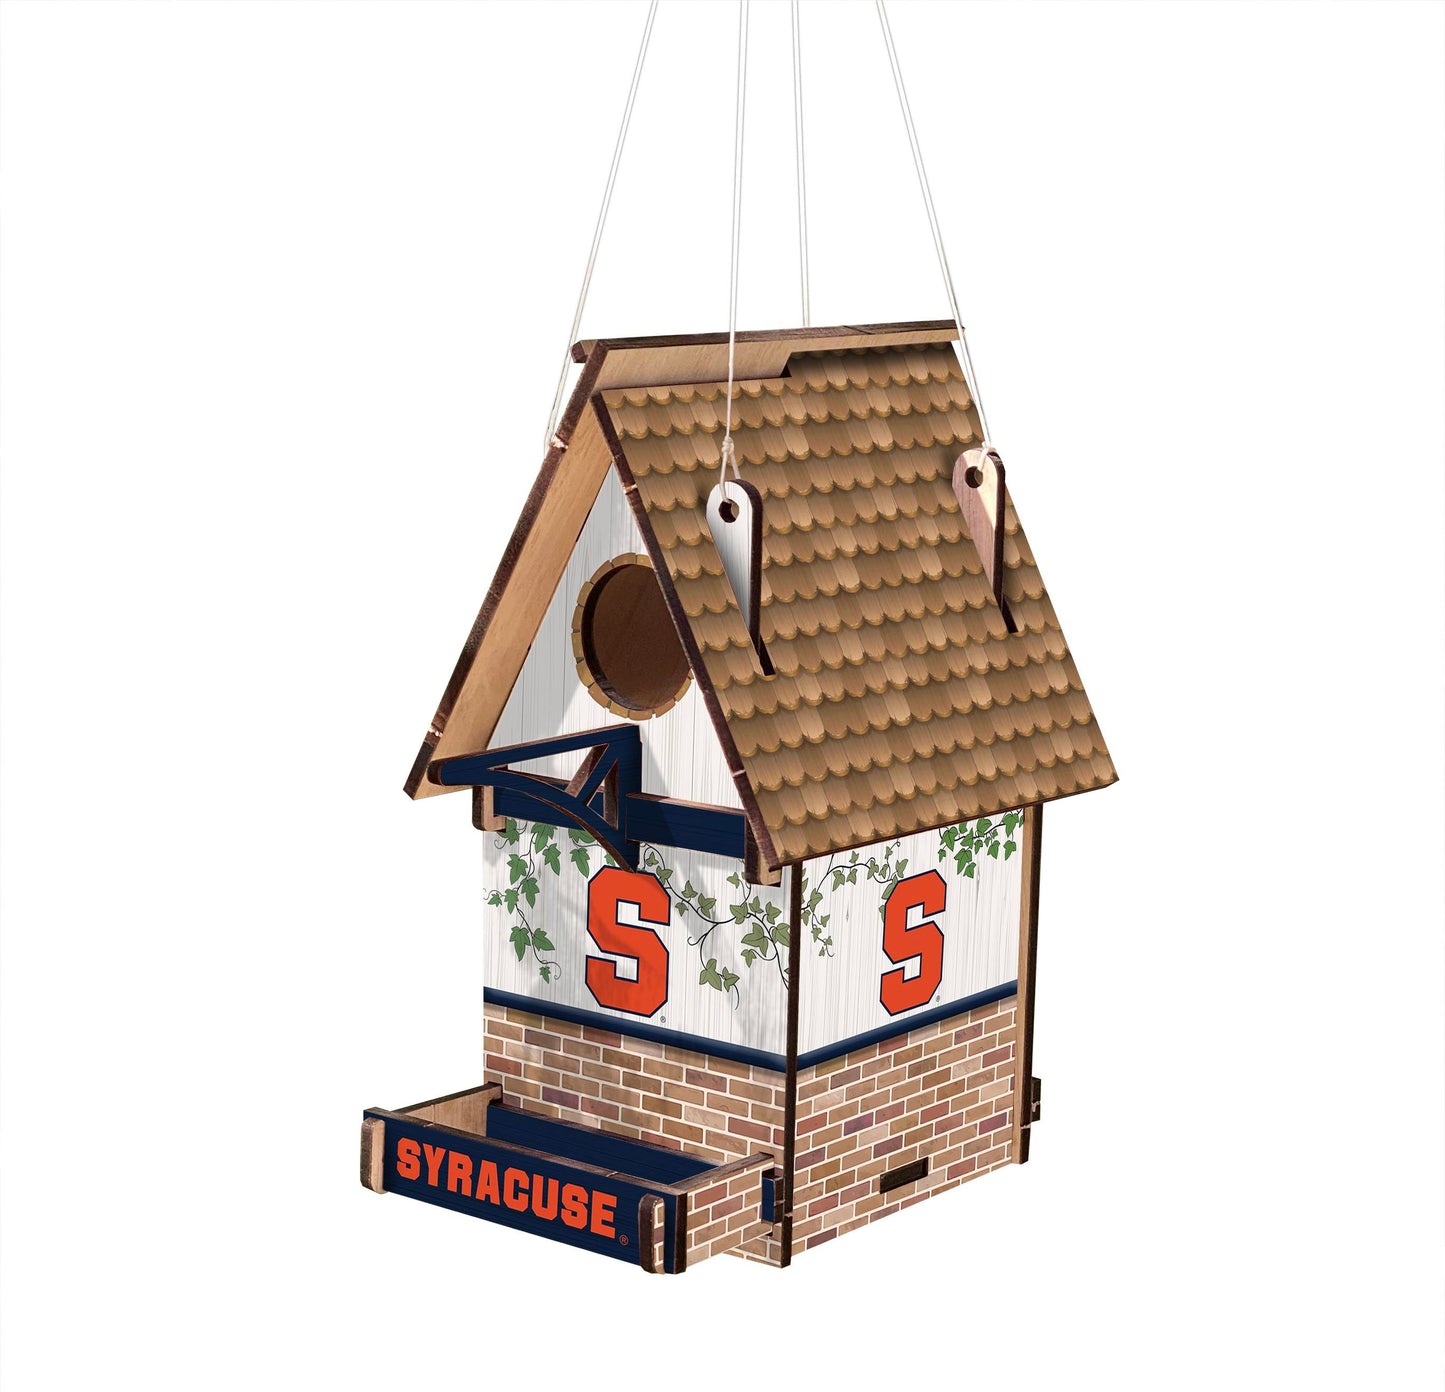 This Syracuse Orange NCAA Wood Birdhouse is the perfect way to show your school spirit while also promoting the love of birds. The birdhouse is made of MDF, cut and printed with official team graphics and colors. Measuring 15" x 15", the birdhouse features an officially licensed design and is proudly made in the USA.